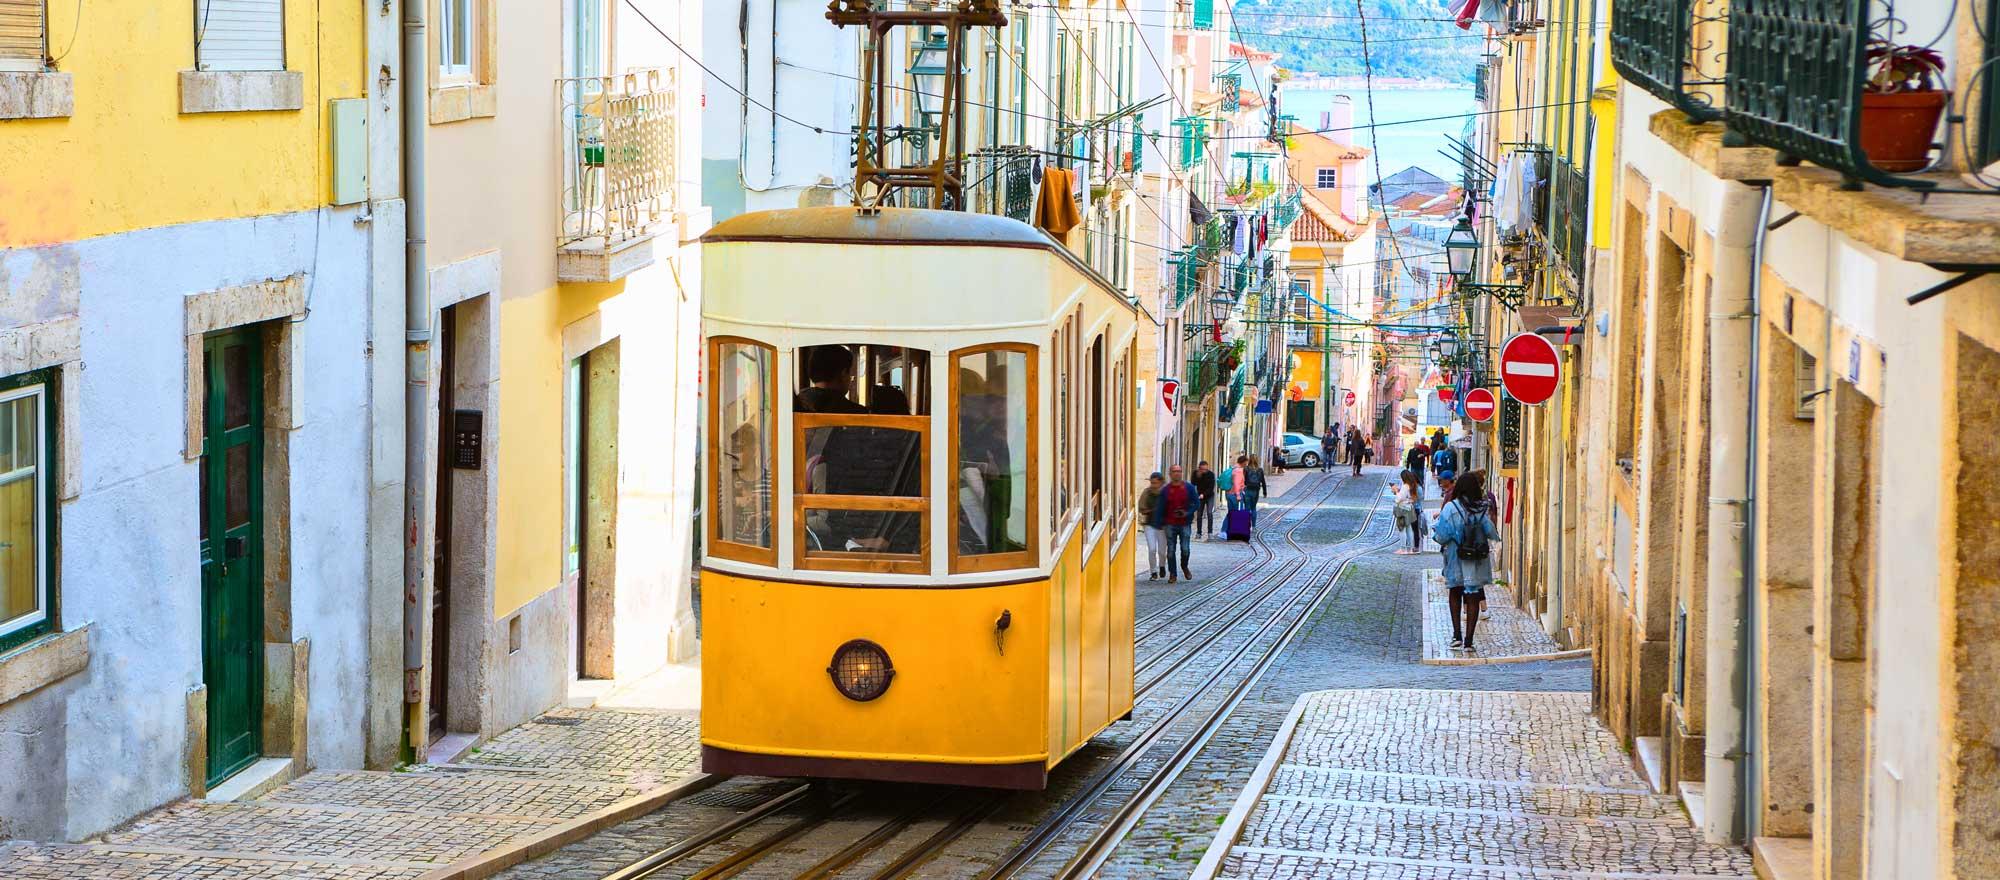 Lisbon's Gloria funicular classified as a national monument opened 1885 located on the west side of the Avenida da Liberdade connects downtown with Bairro Photo: Adobe Stock